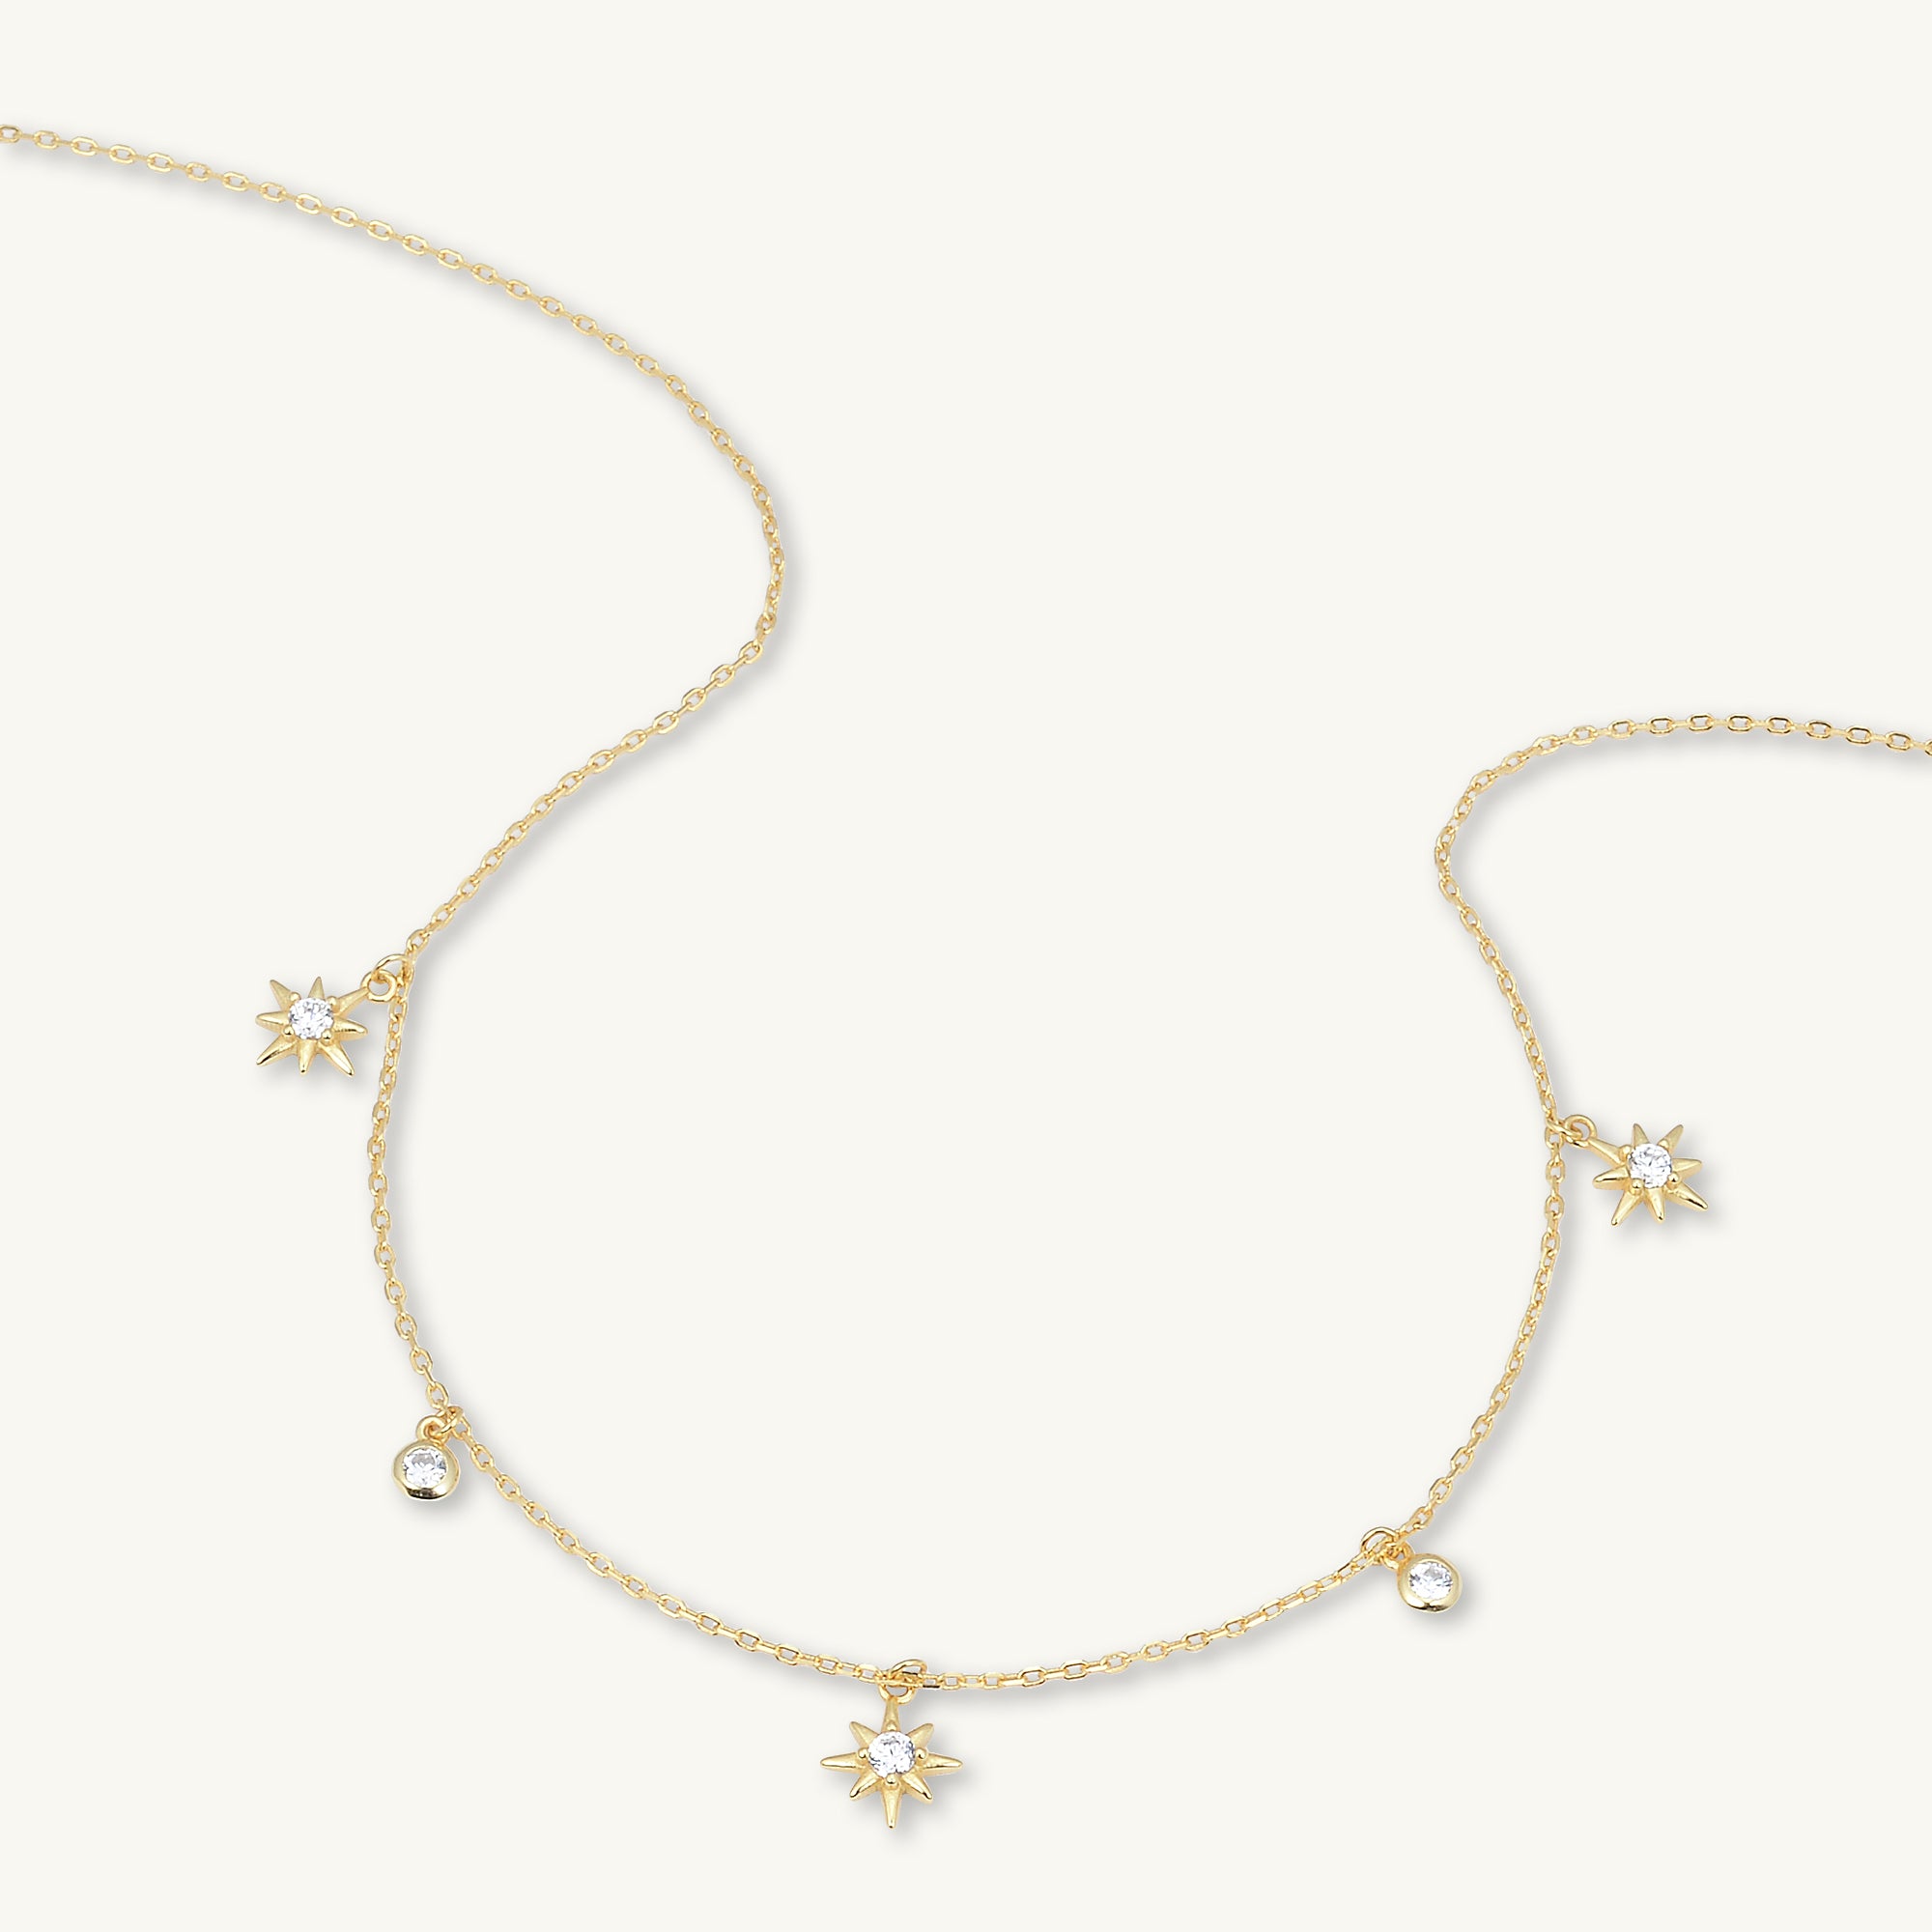 North Star Dangling Sapphire Necklace